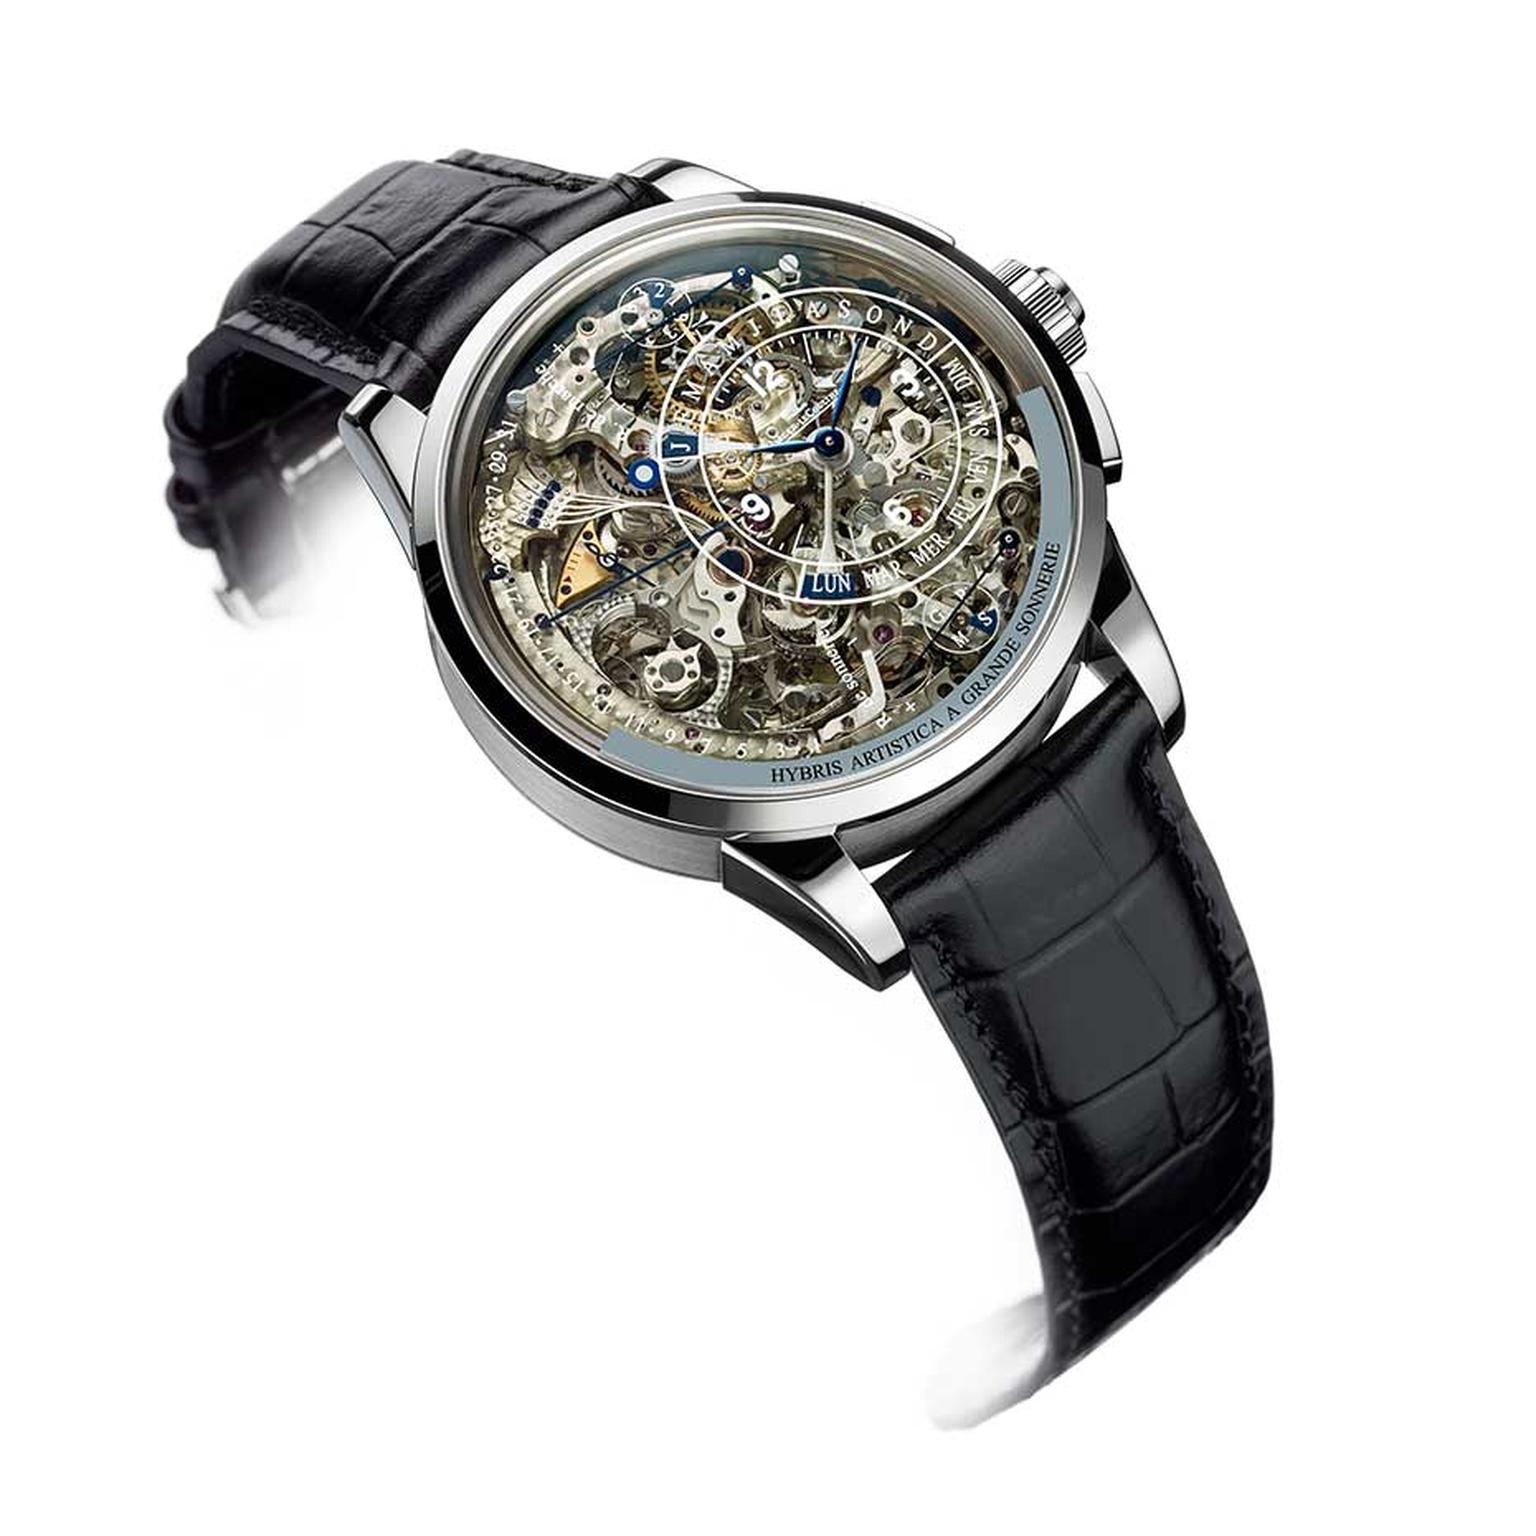 Jaeger-LeCoultre Duomètre à Grande Sonnerie, one of the most complicated watches in the world